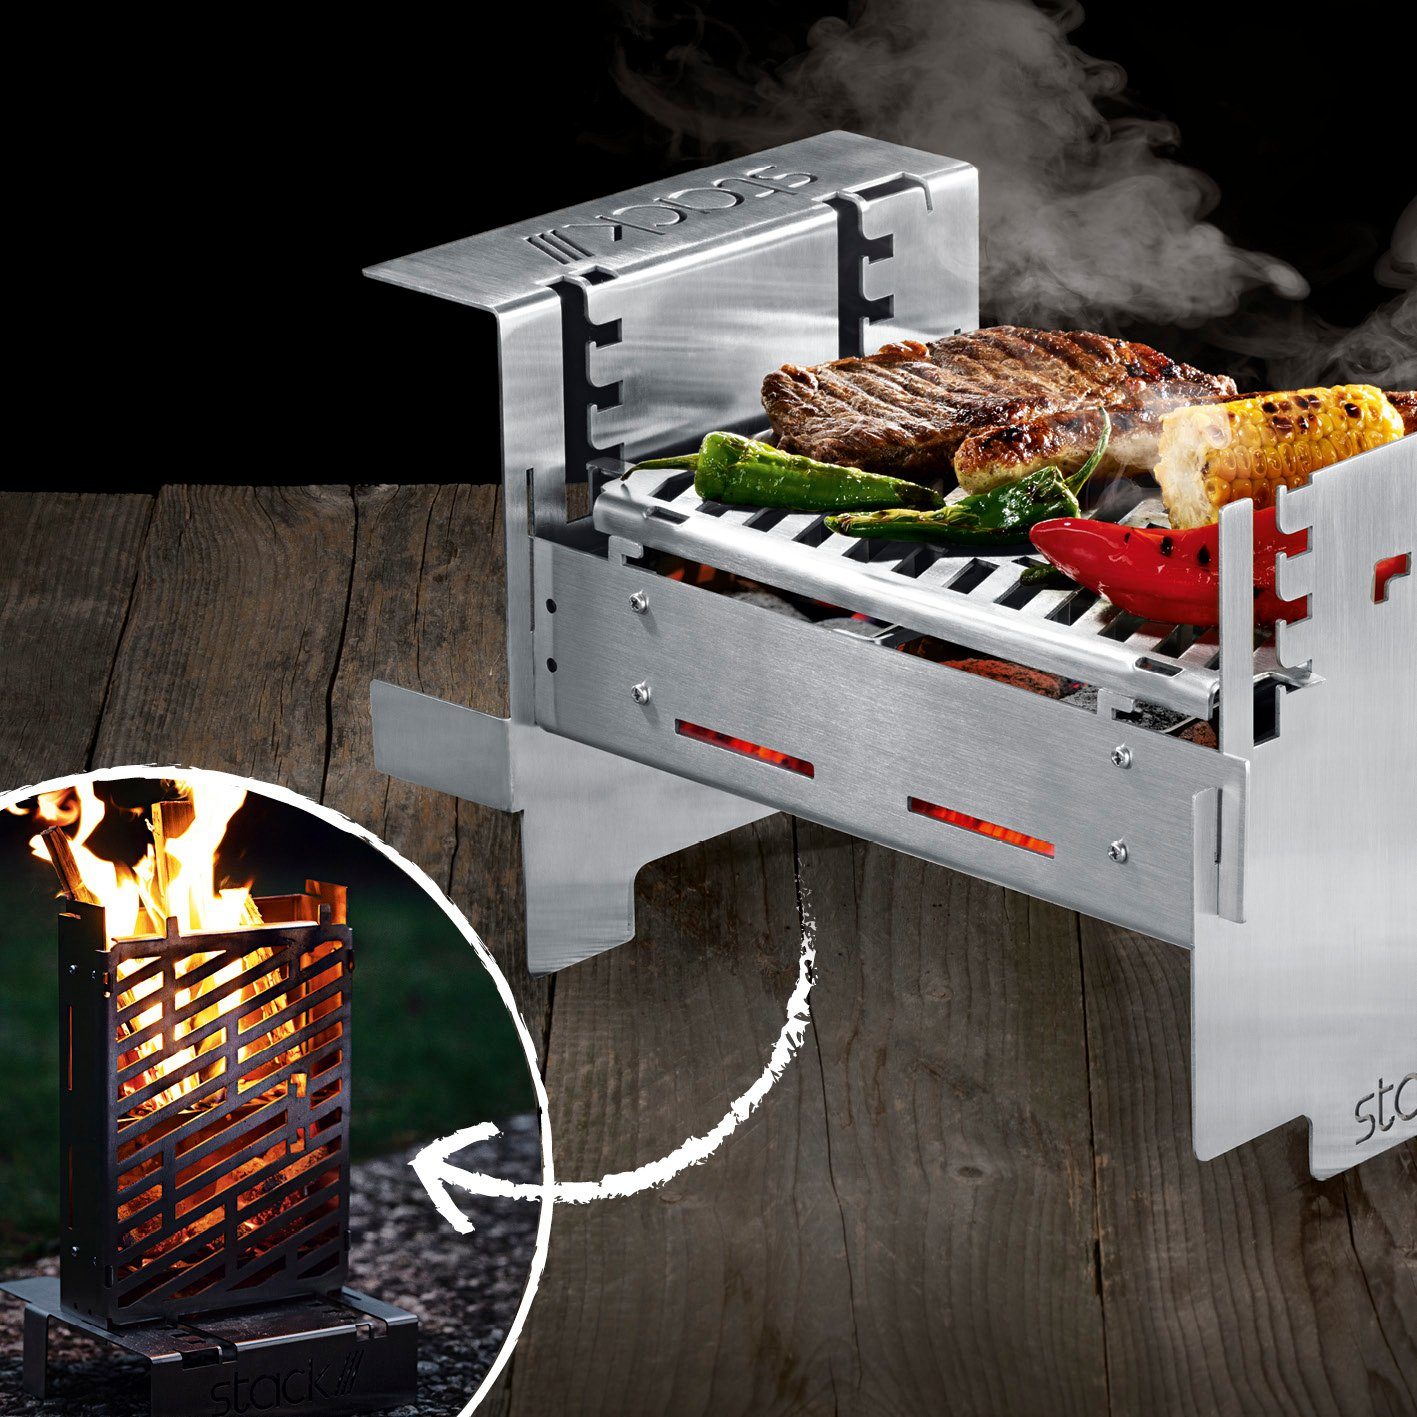 n' 27 Feuerstelle 1 cm x und stack Grill Feuerkorb Trangia Stack Grillfläche grill, in Holzkohlegrill 21 2 stack///grill